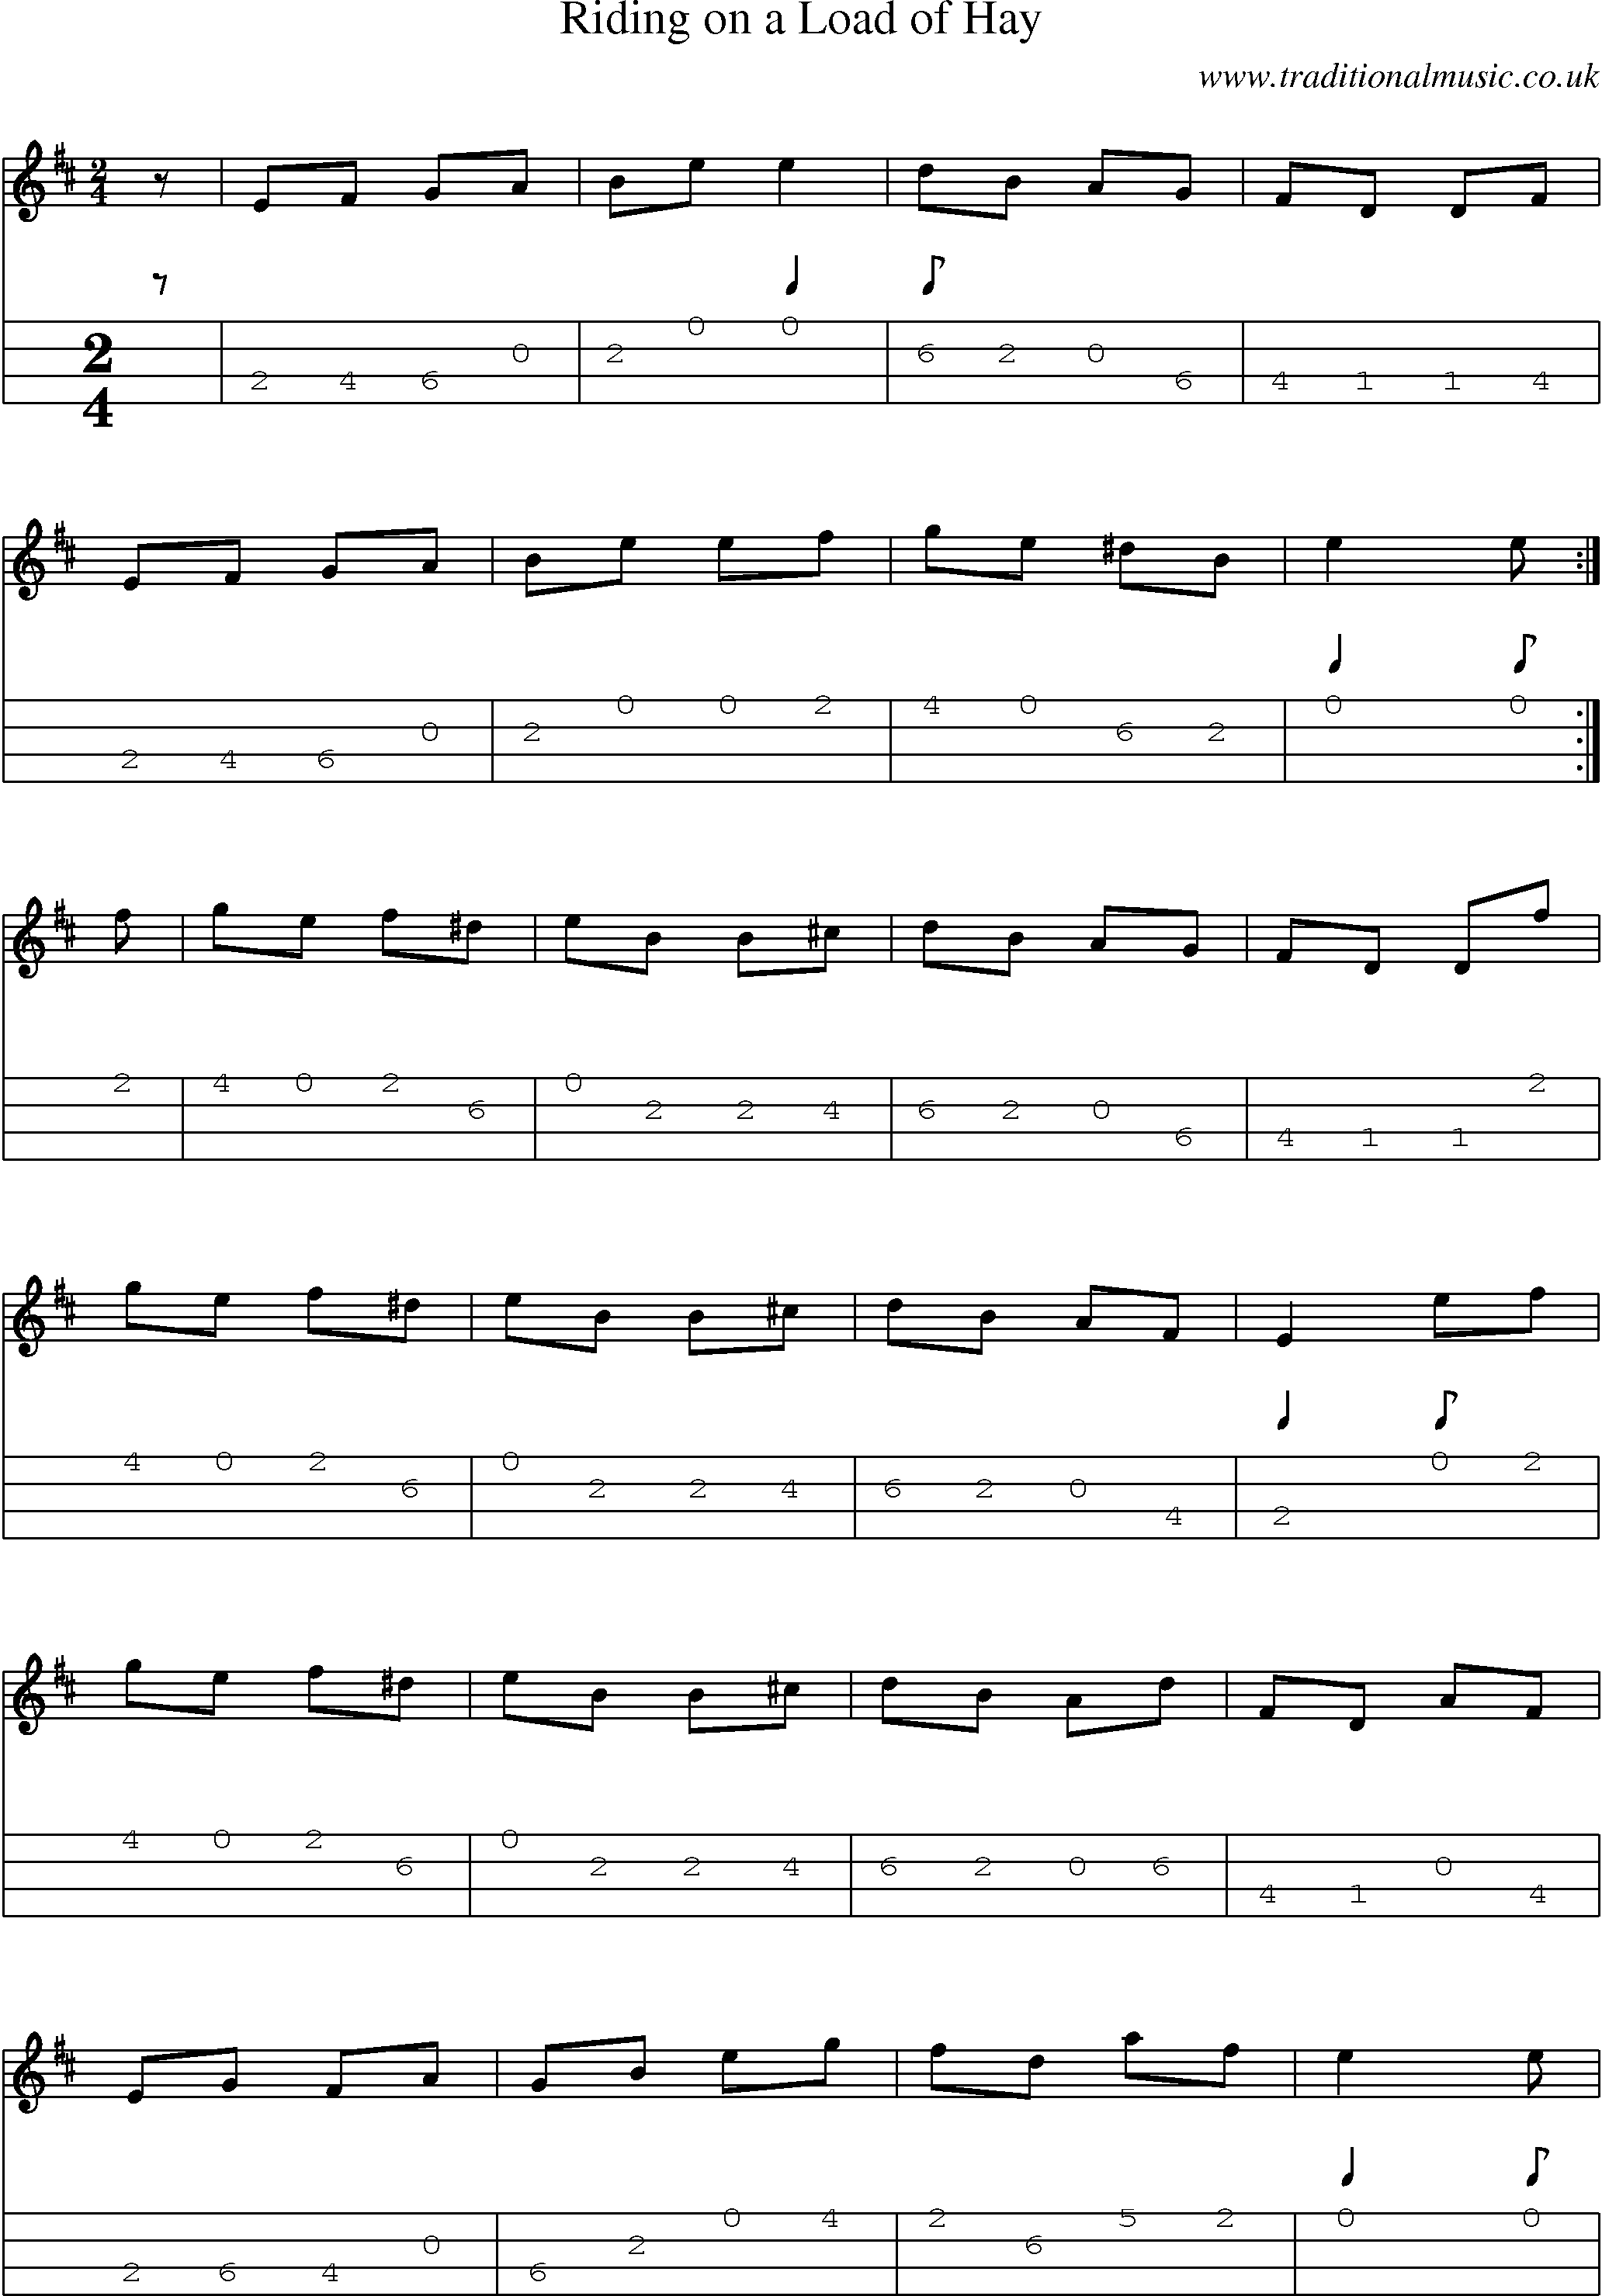 Music Score and Mandolin Tabs for Riding On A Load Of Hay